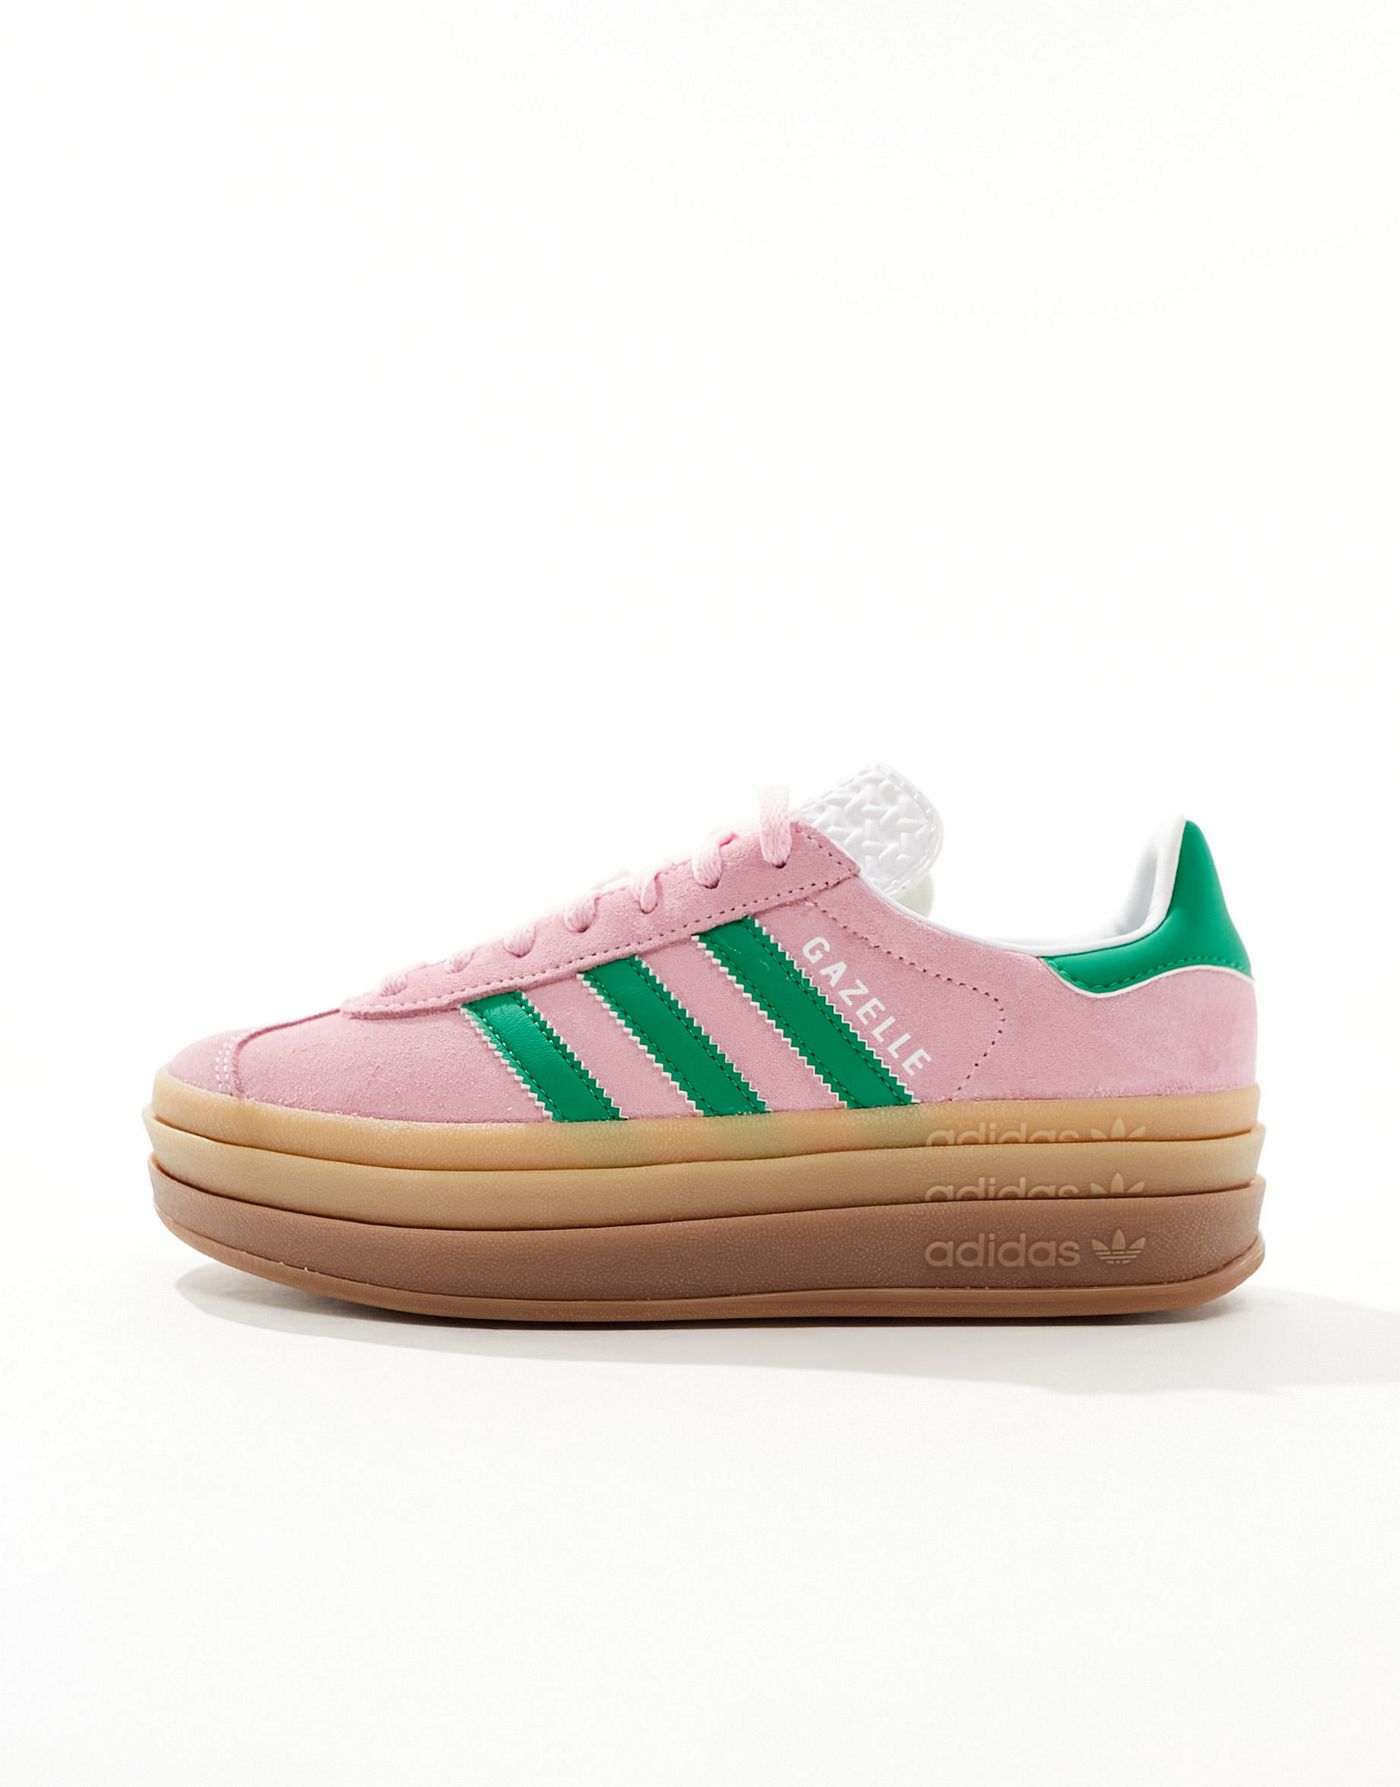 adidas Originals Gazelle Bold trainers in pastel pink and green